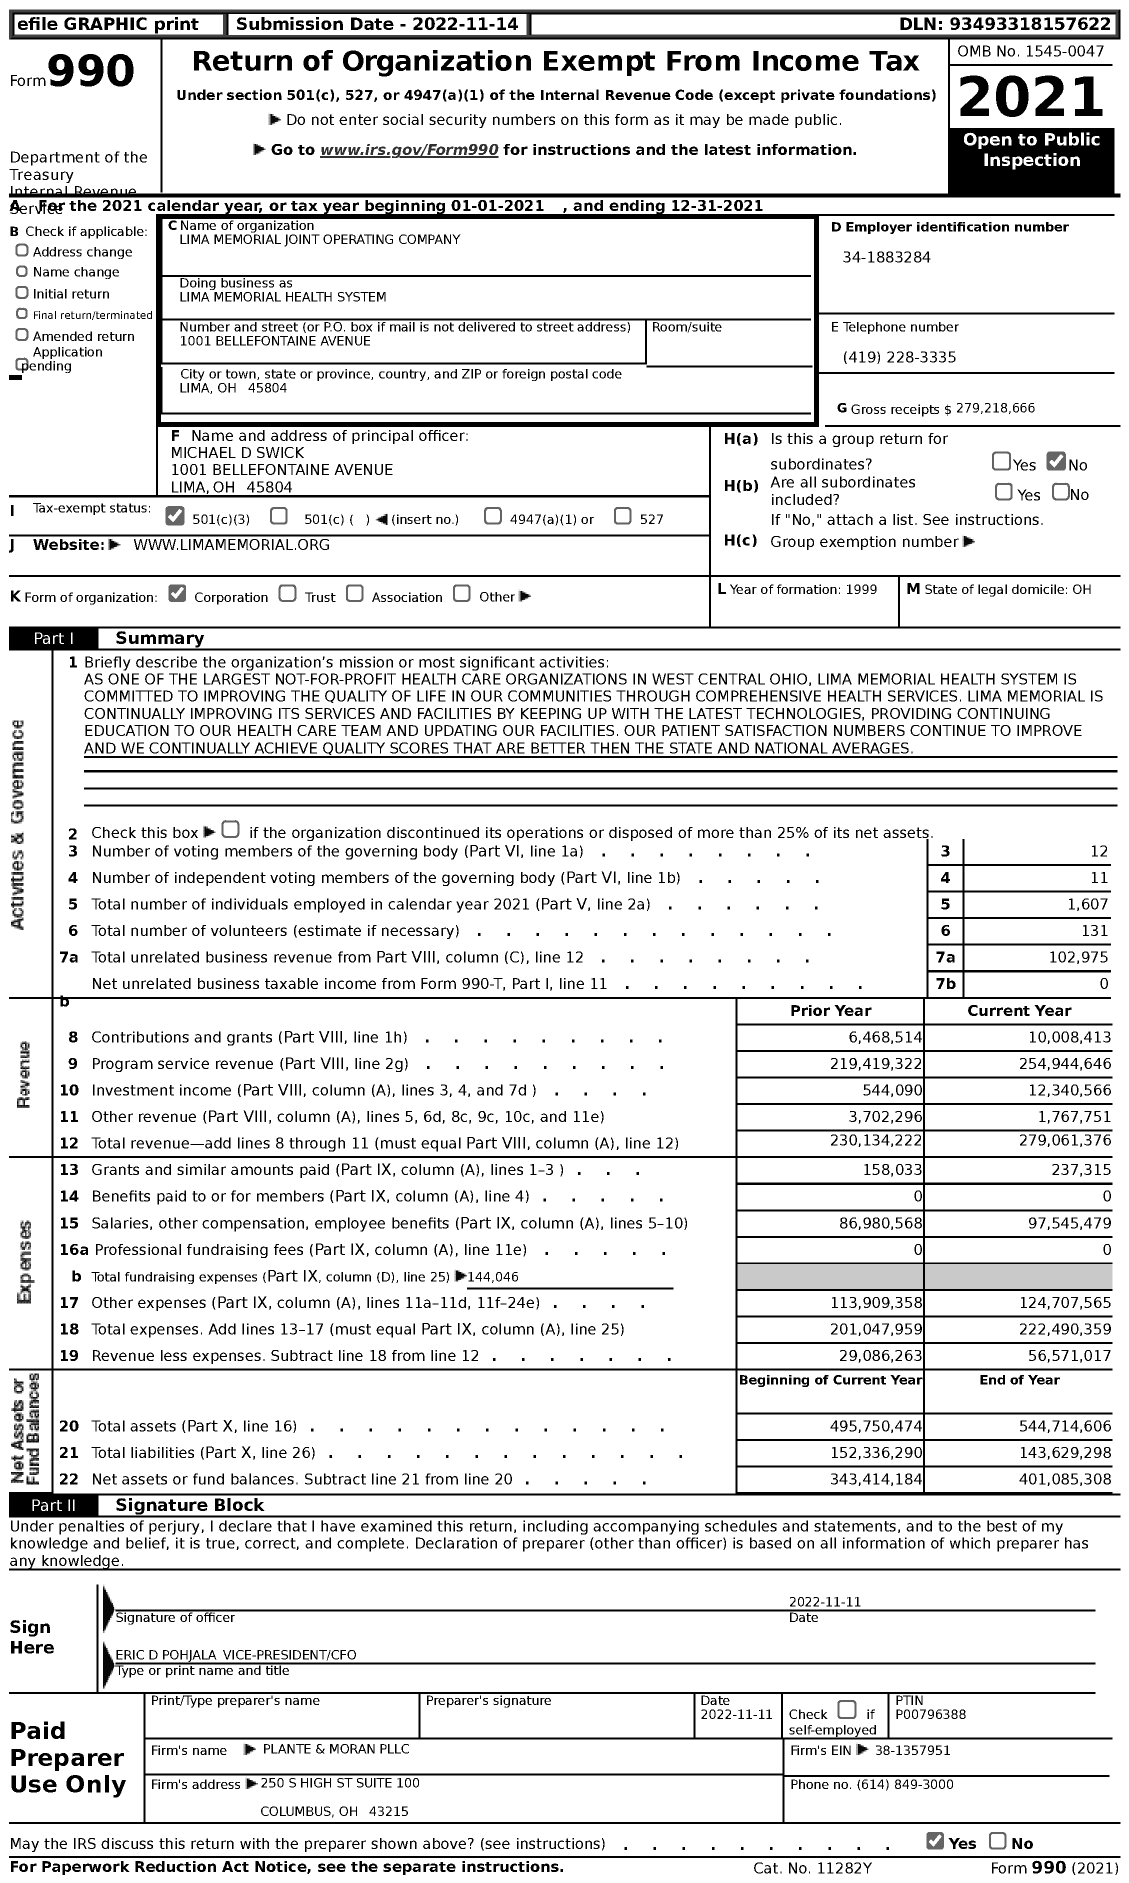 Image of first page of 2021 Form 990 for Lima Memorial Health System / Lima Memorial Joint Operating Company